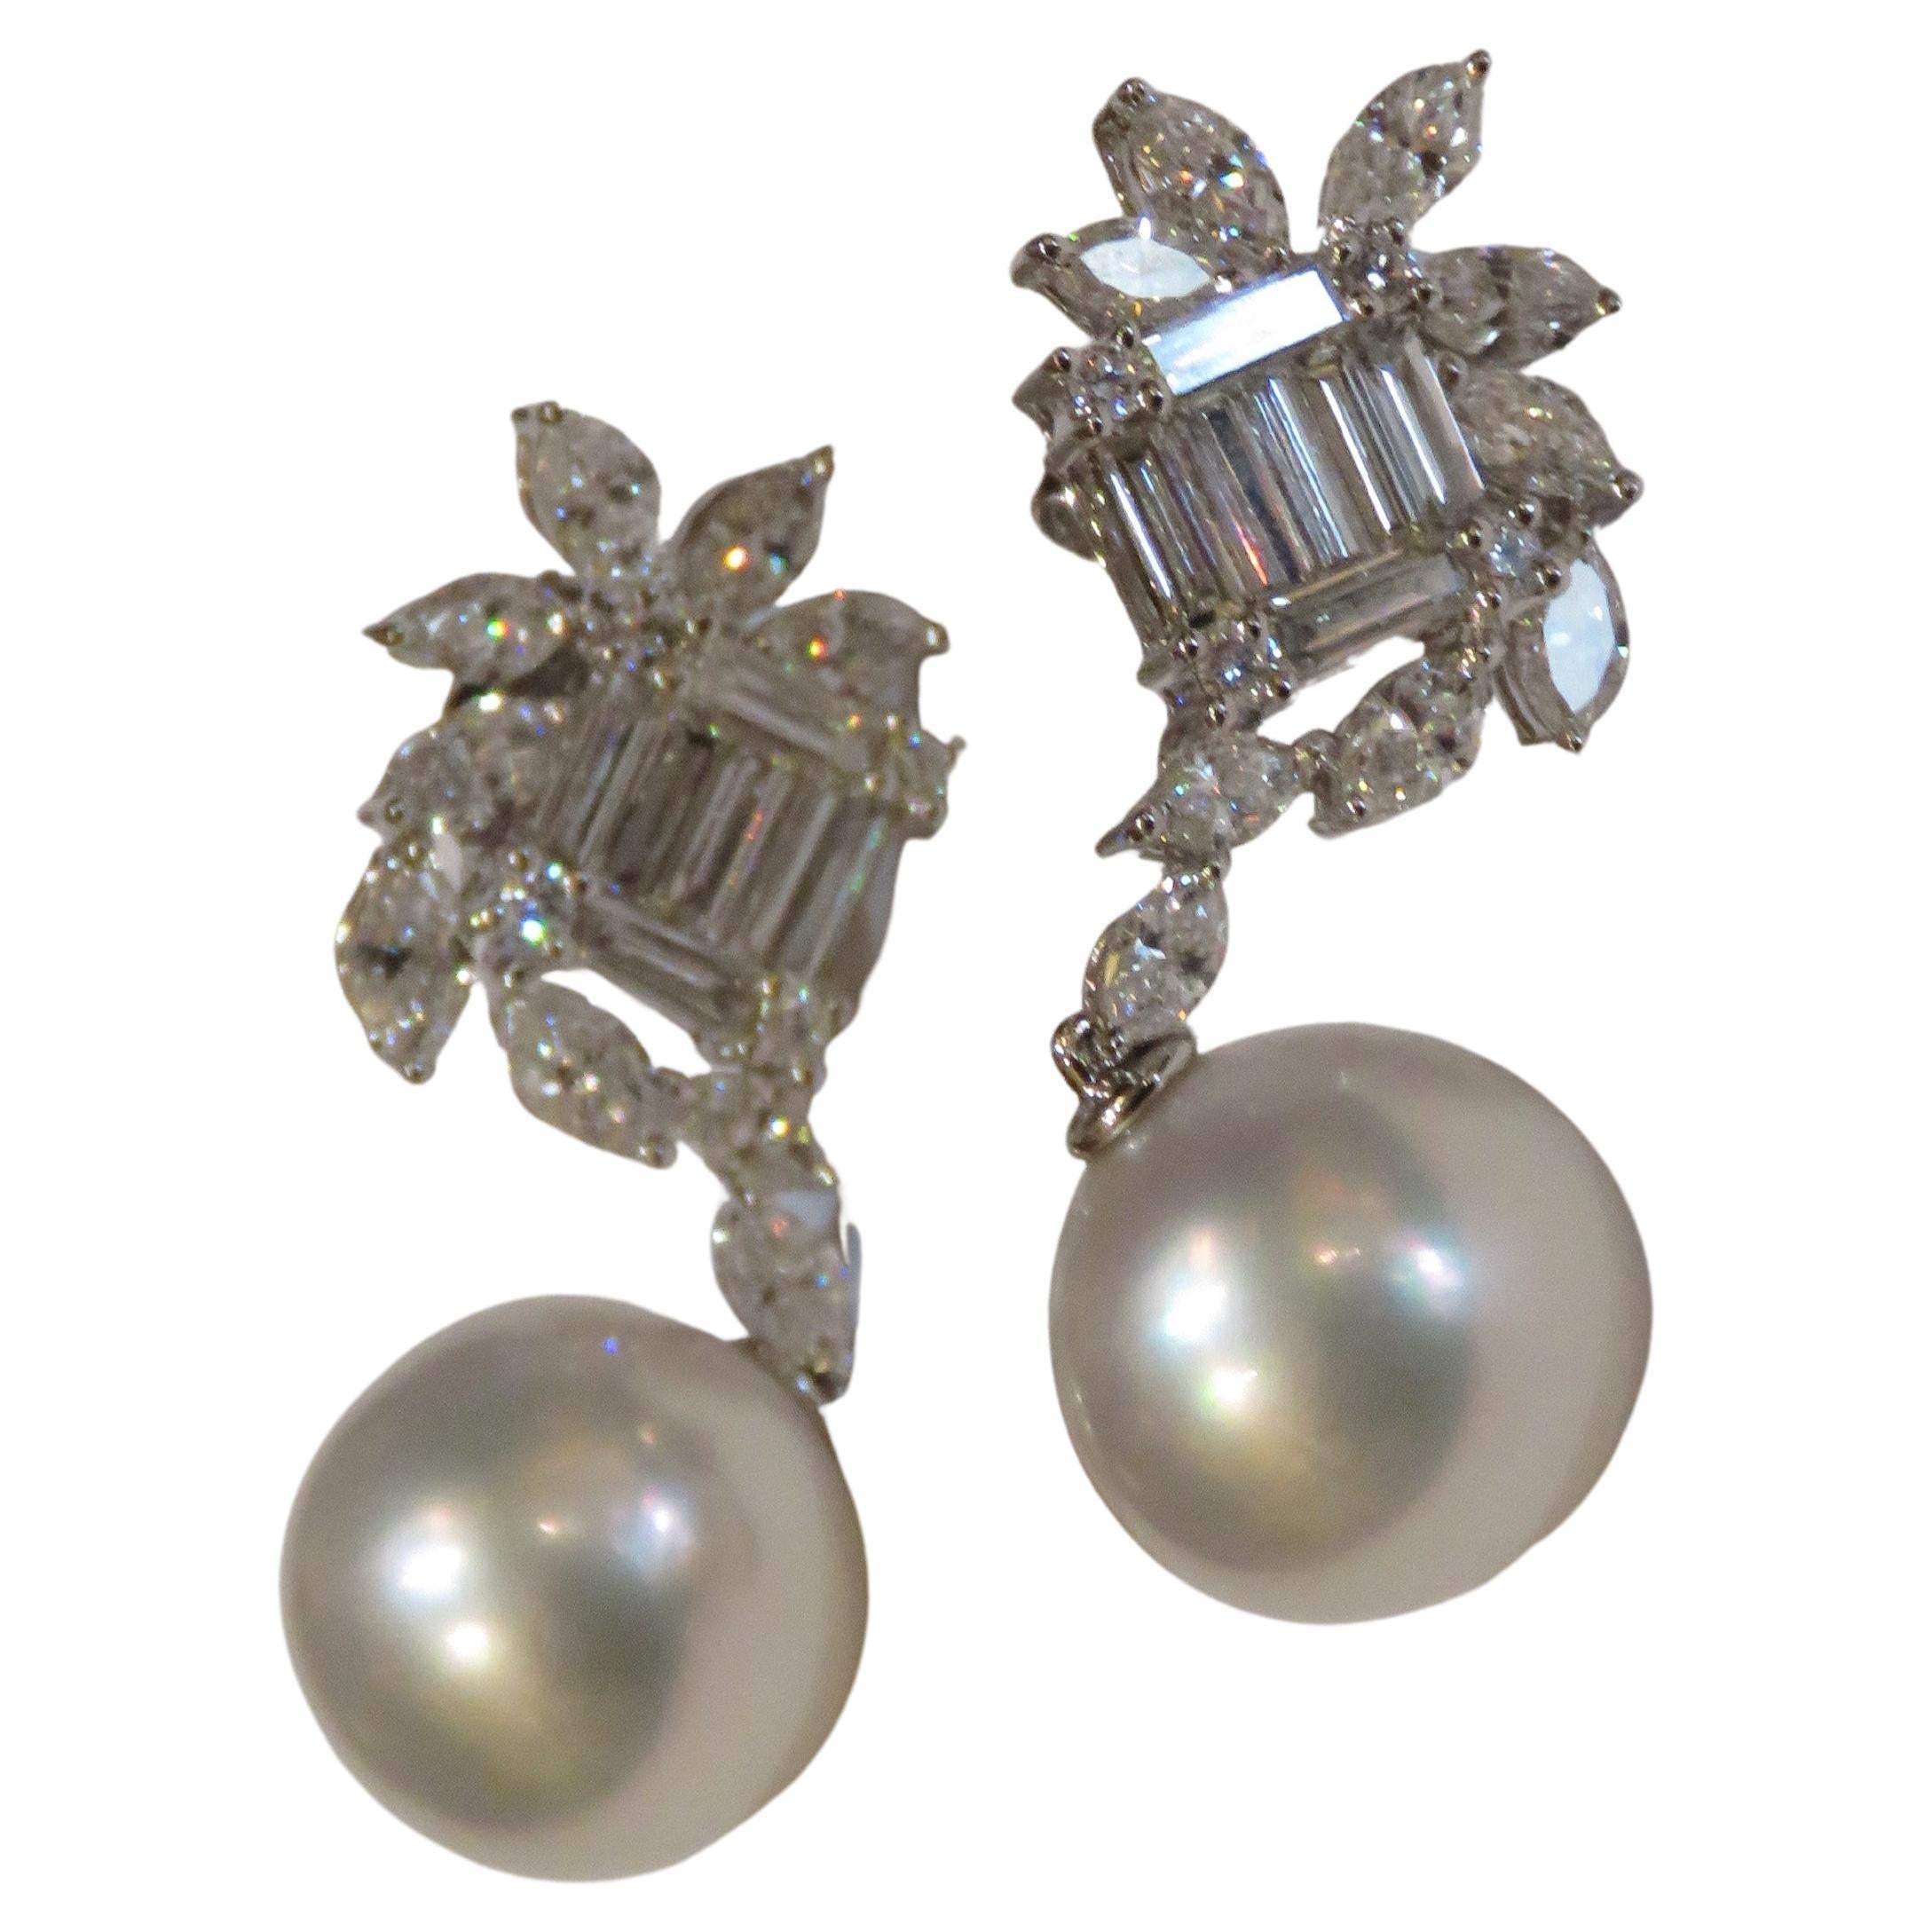 NWT $16, 109 Rare 18KT White Gold Fancy Large South Sea Pearl Diamond Earrings